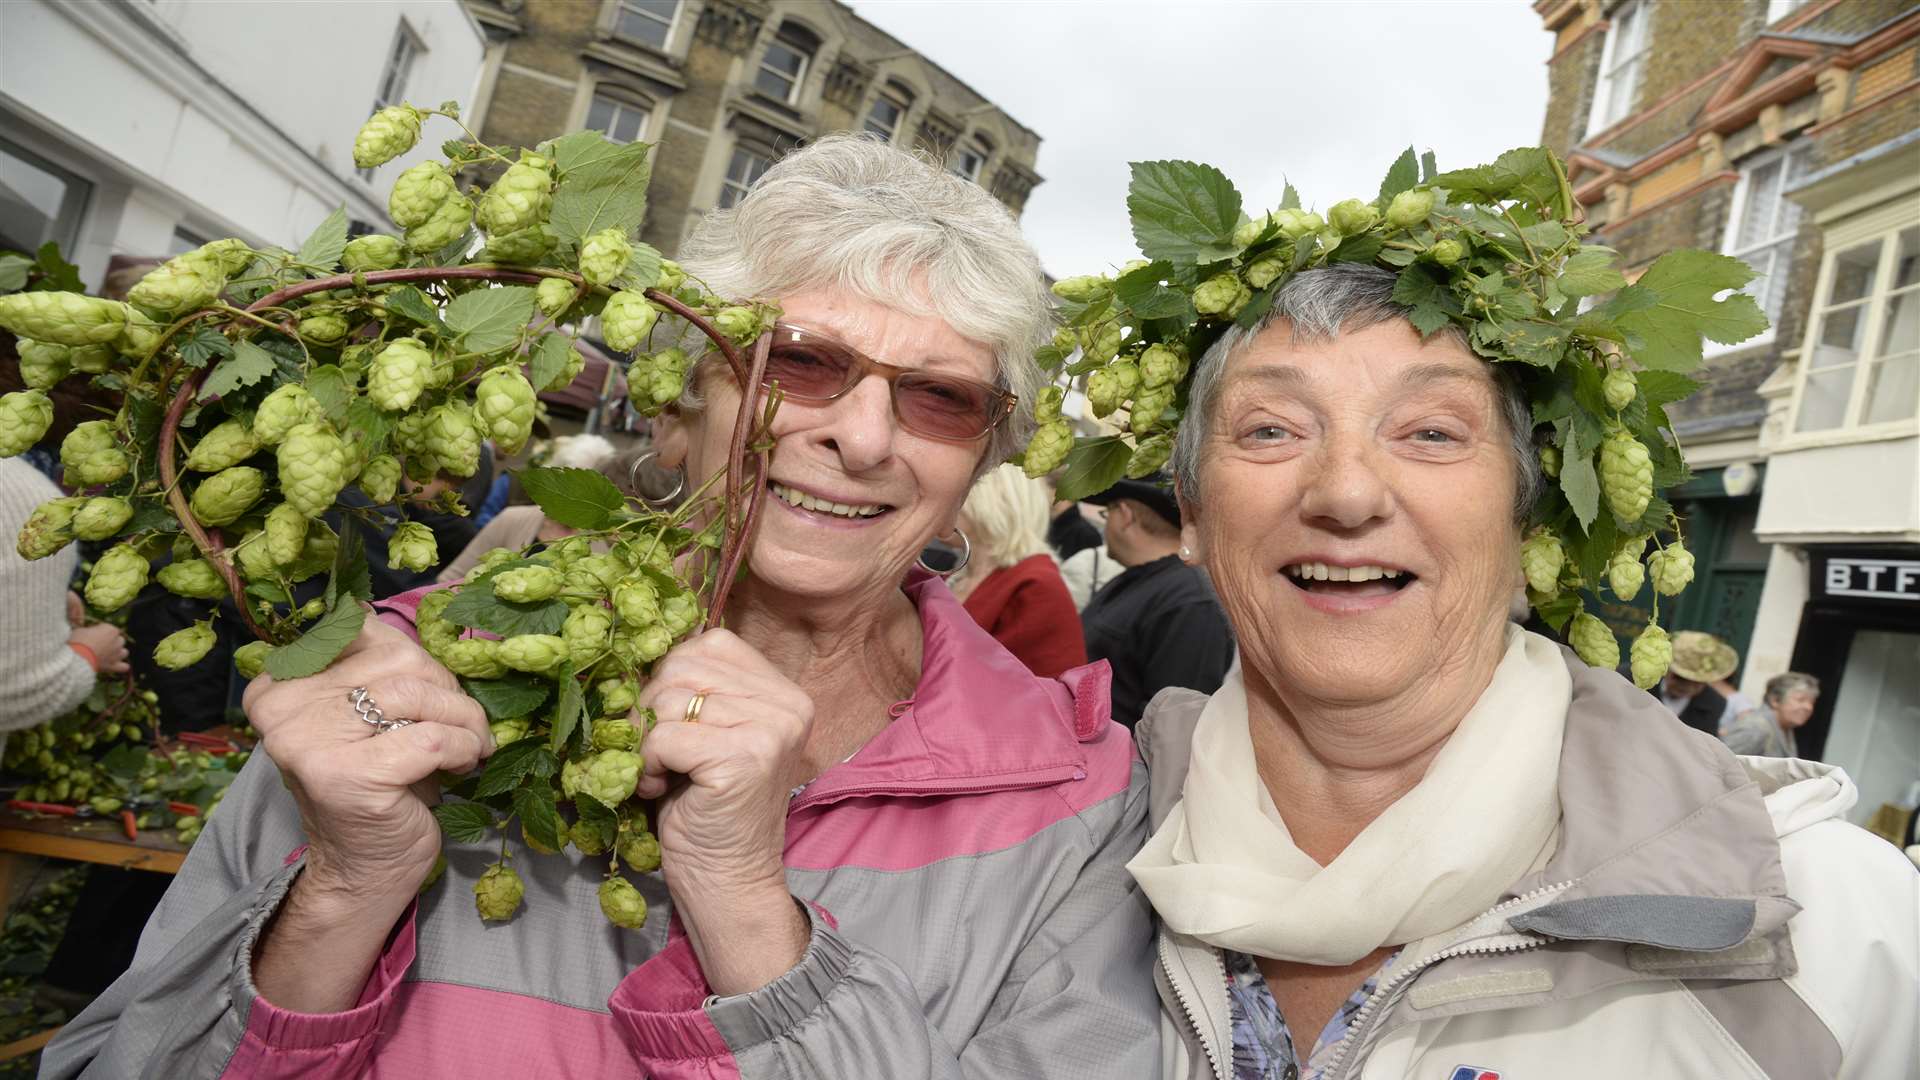 This weekend marks the 27th Faversham Hop Festival